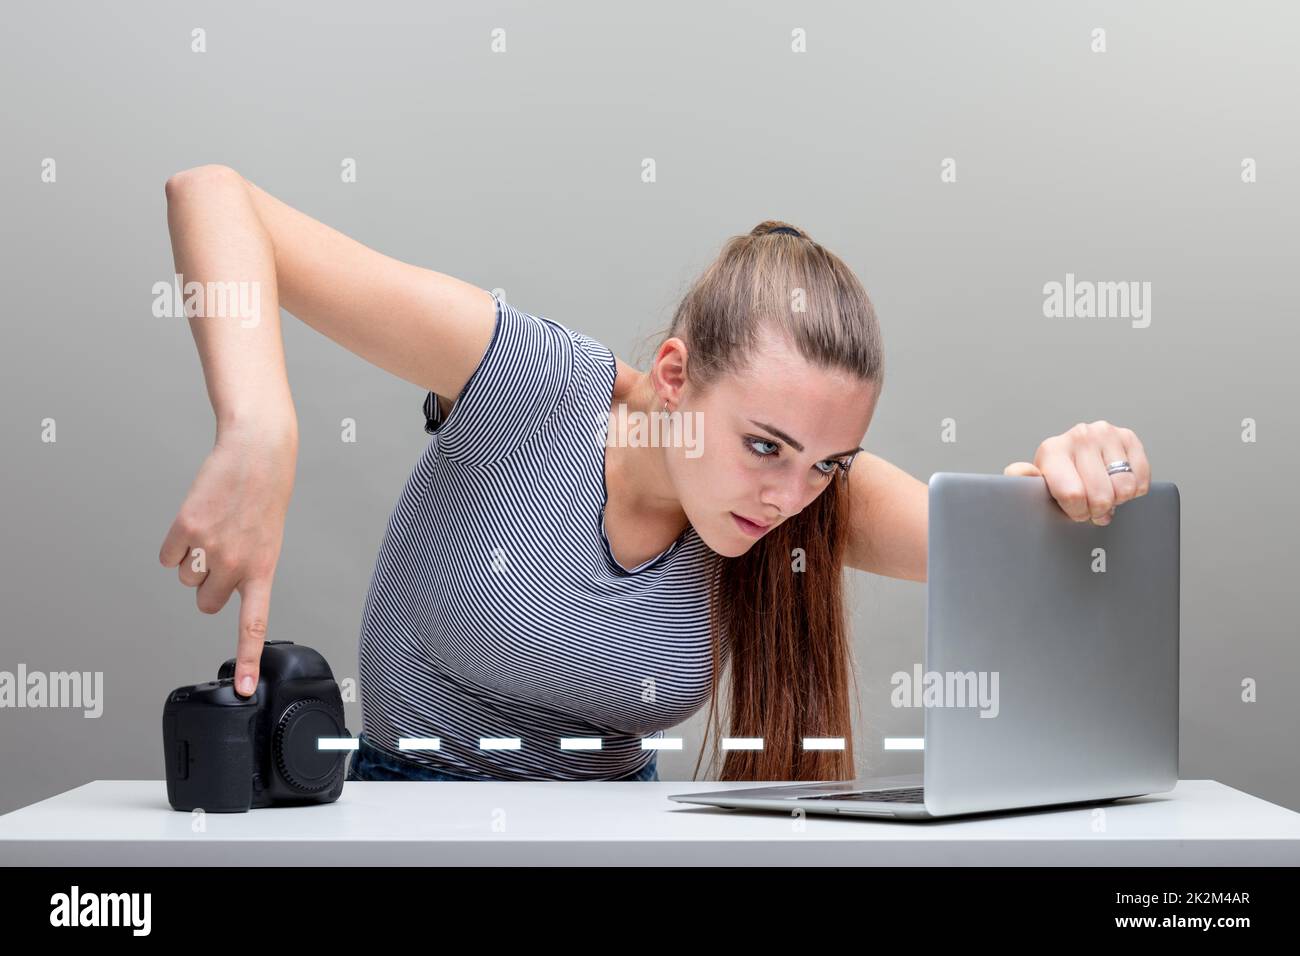 woman transfers pictures from her digital camera Stock Photo